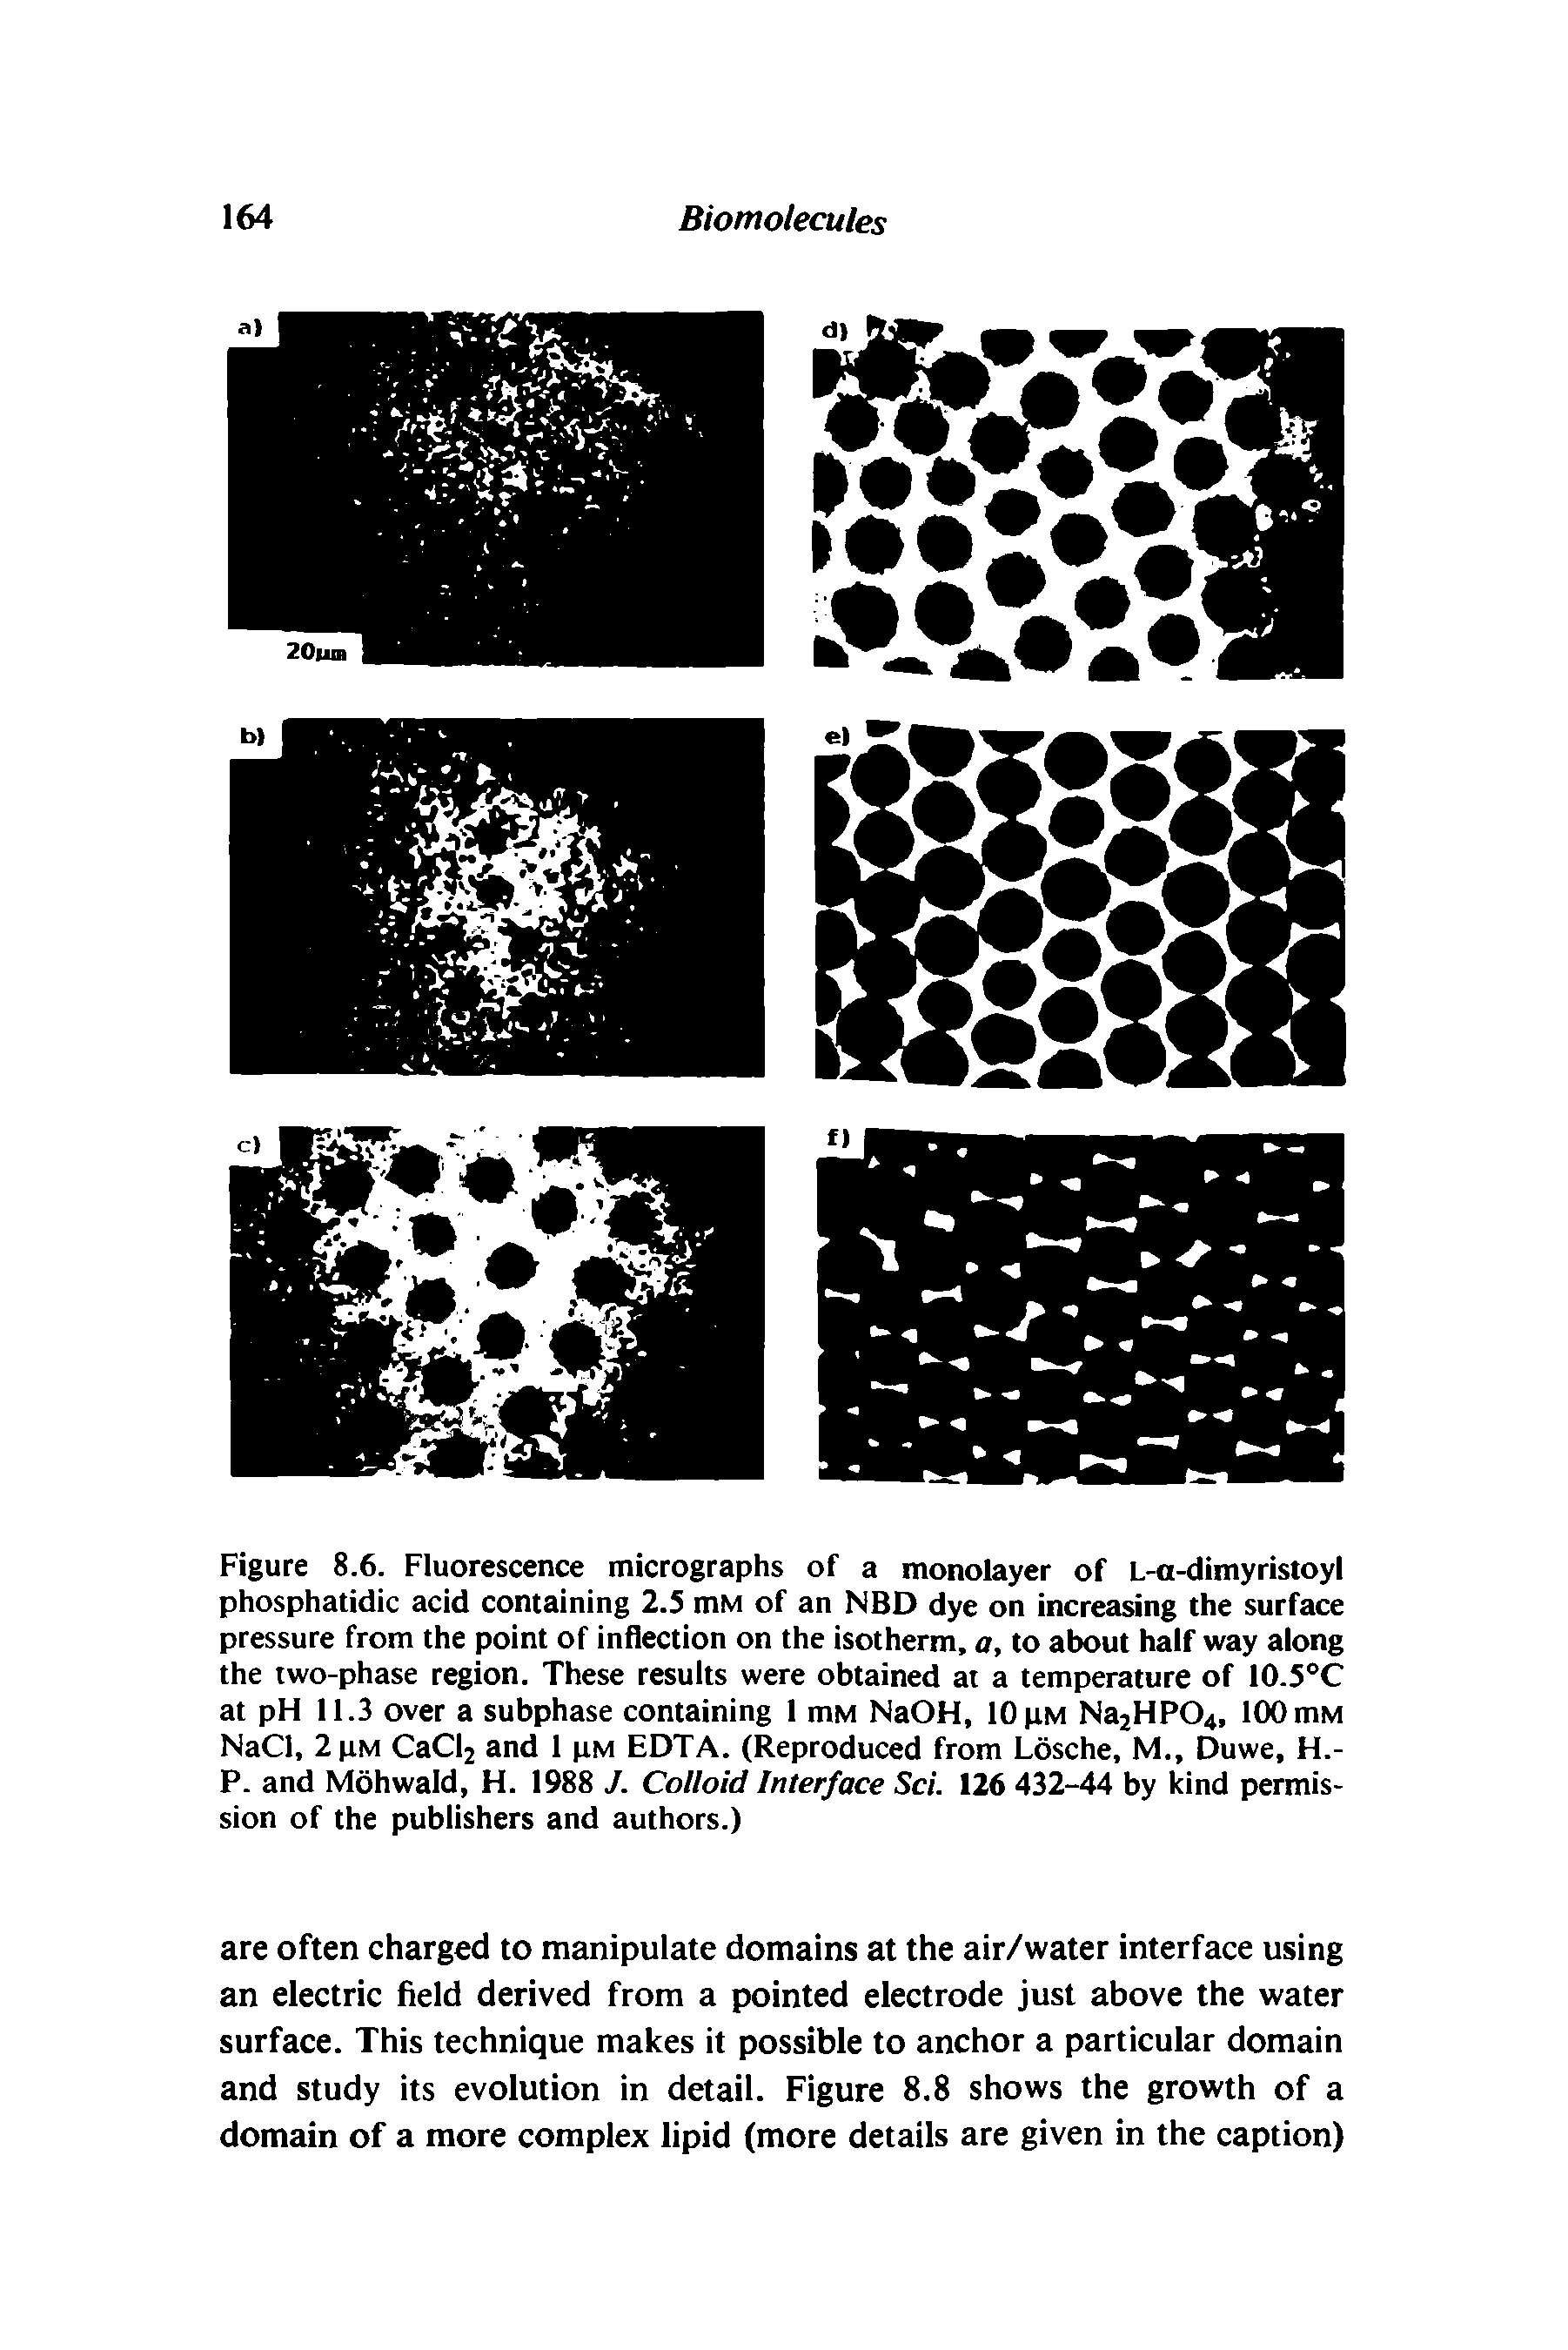 Figure 8.6. Fluorescence micrographs of a monolayer of L-a-dimyristoyl phosphatidic acid containing 2.5 mM of an NBD dye on increasing the surface pressure from the point of inflection on the isotherm, a, to about half way along the two-phase region. These results were obtained at a temperature of 10.5°C at pH 11.3 over a subphase containing 1 mM NaOH, 10 pM Na2HP04, 100 mM NaCl, 2 pM CaCI2 and 1 pm EDTA. (Reproduced from Losche, M., Duwe, H.-P. and Mohwald, H. 1988 J. Colloid Interface Sci. 126 432-44 by kind permission of the publishers and authors.)...